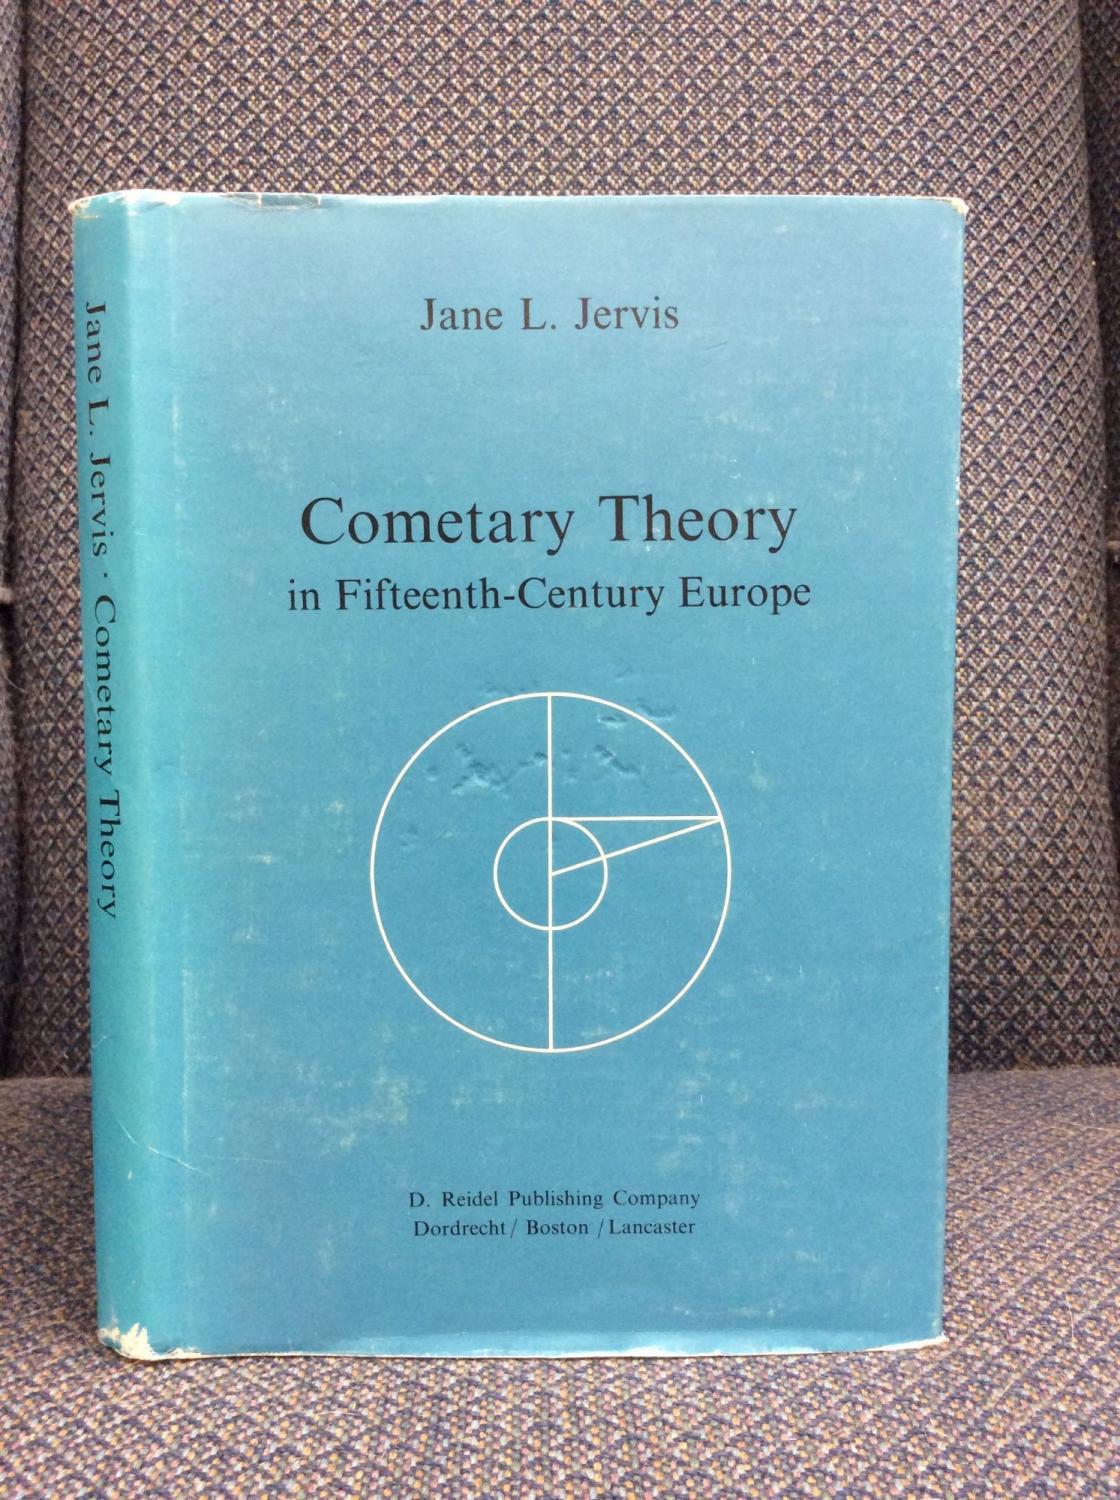 COMETARY THEORY IN FIFTEENTH-CENTURY EUROPE - Jane L. Jervis